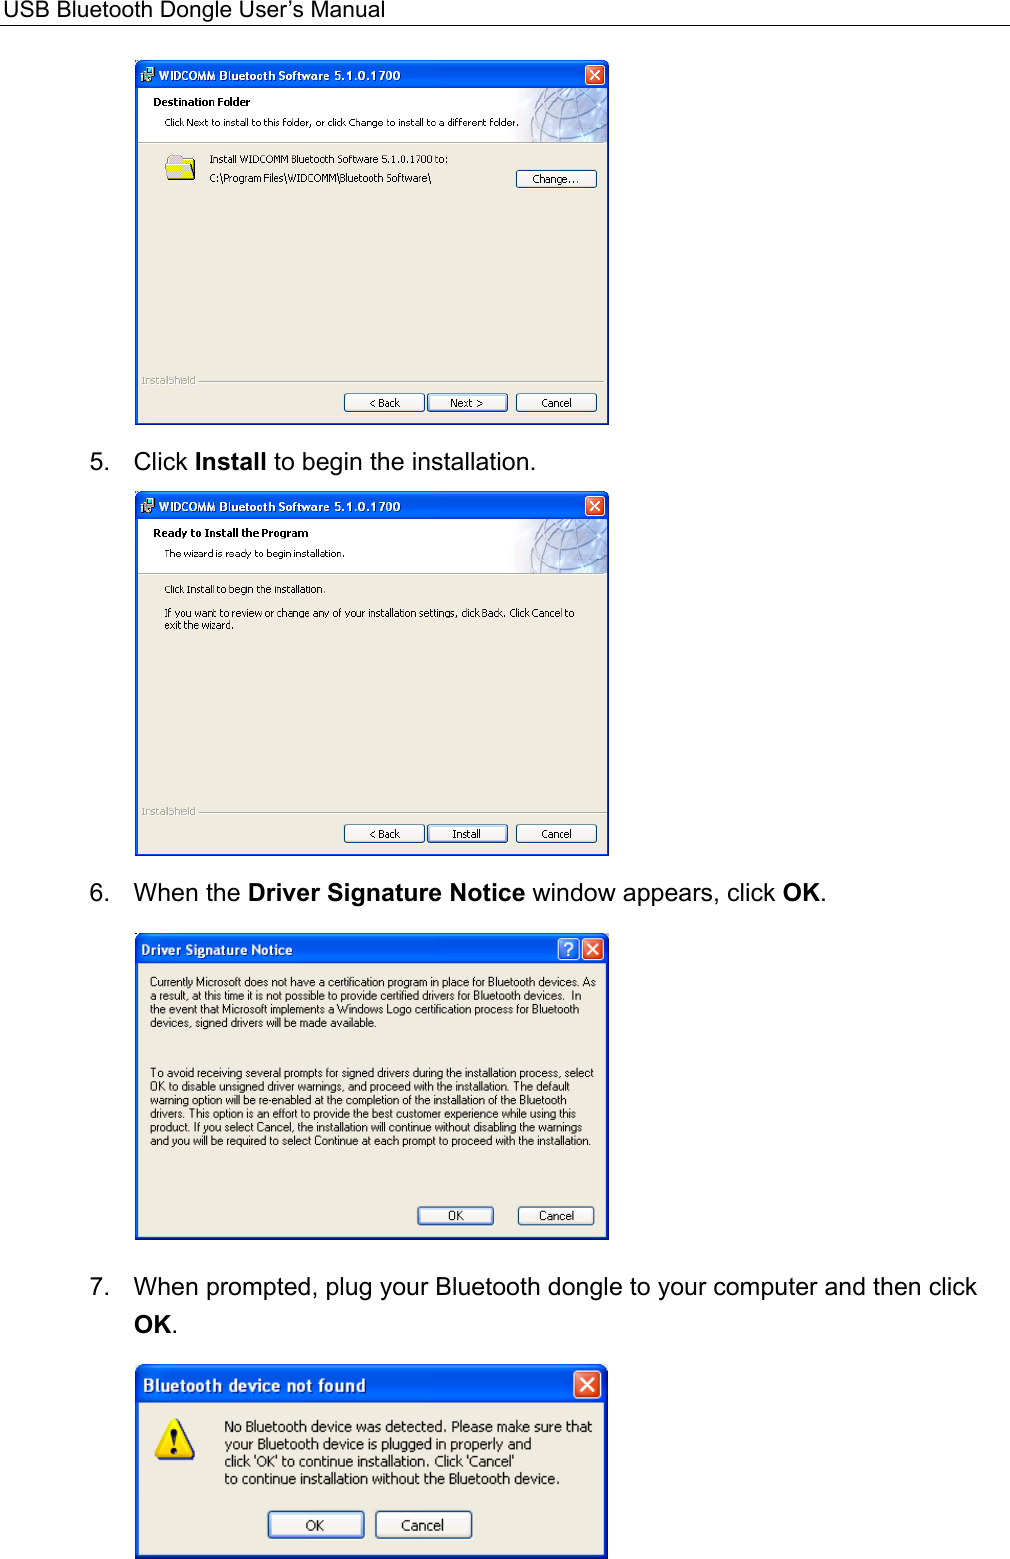 USB Bluetooth Dongle User’s Manual   5. Click Install to begin the installation.    6. When the Driver Signature Notice window appears, click OK.  7.  When prompted, plug your Bluetooth dongle to your computer and then click OK.  